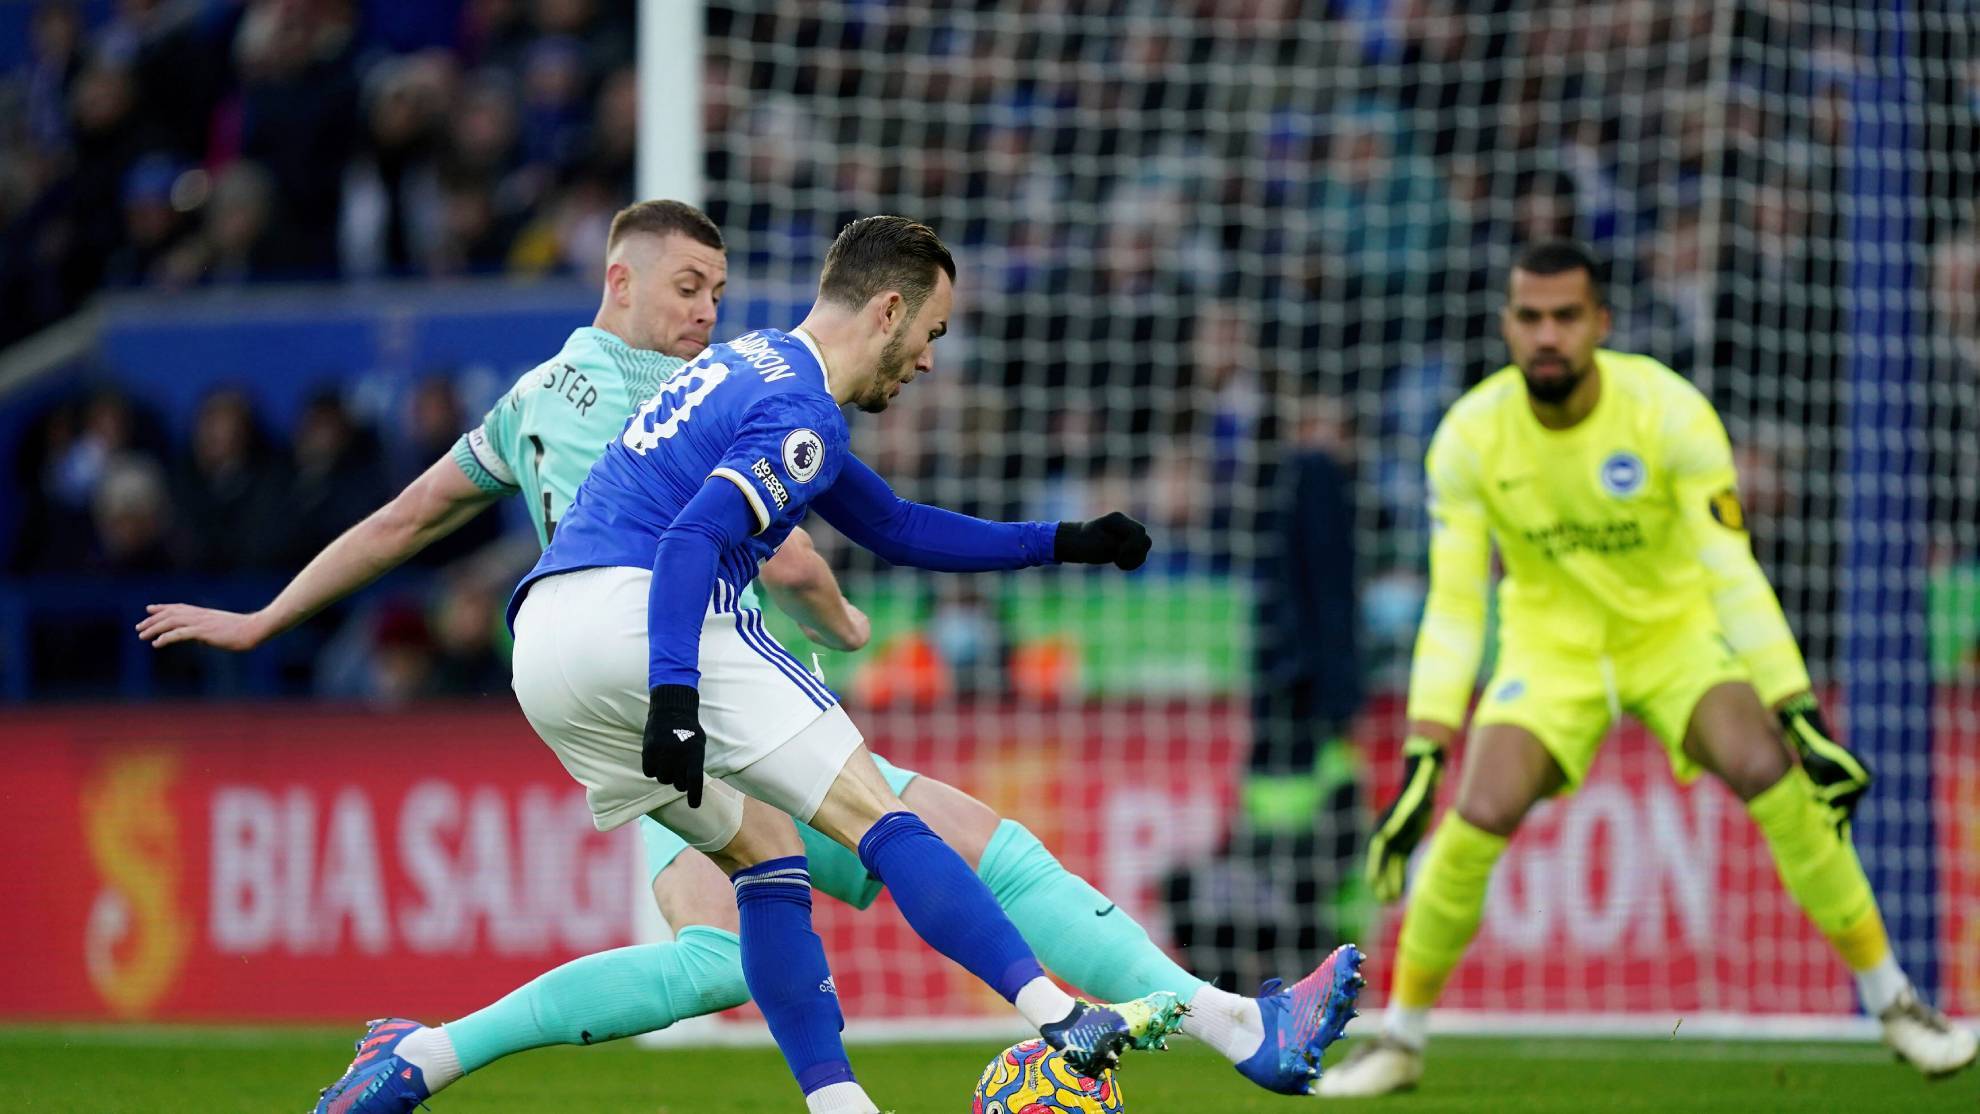 Leicester City's James Maddison has an attempt on goal.